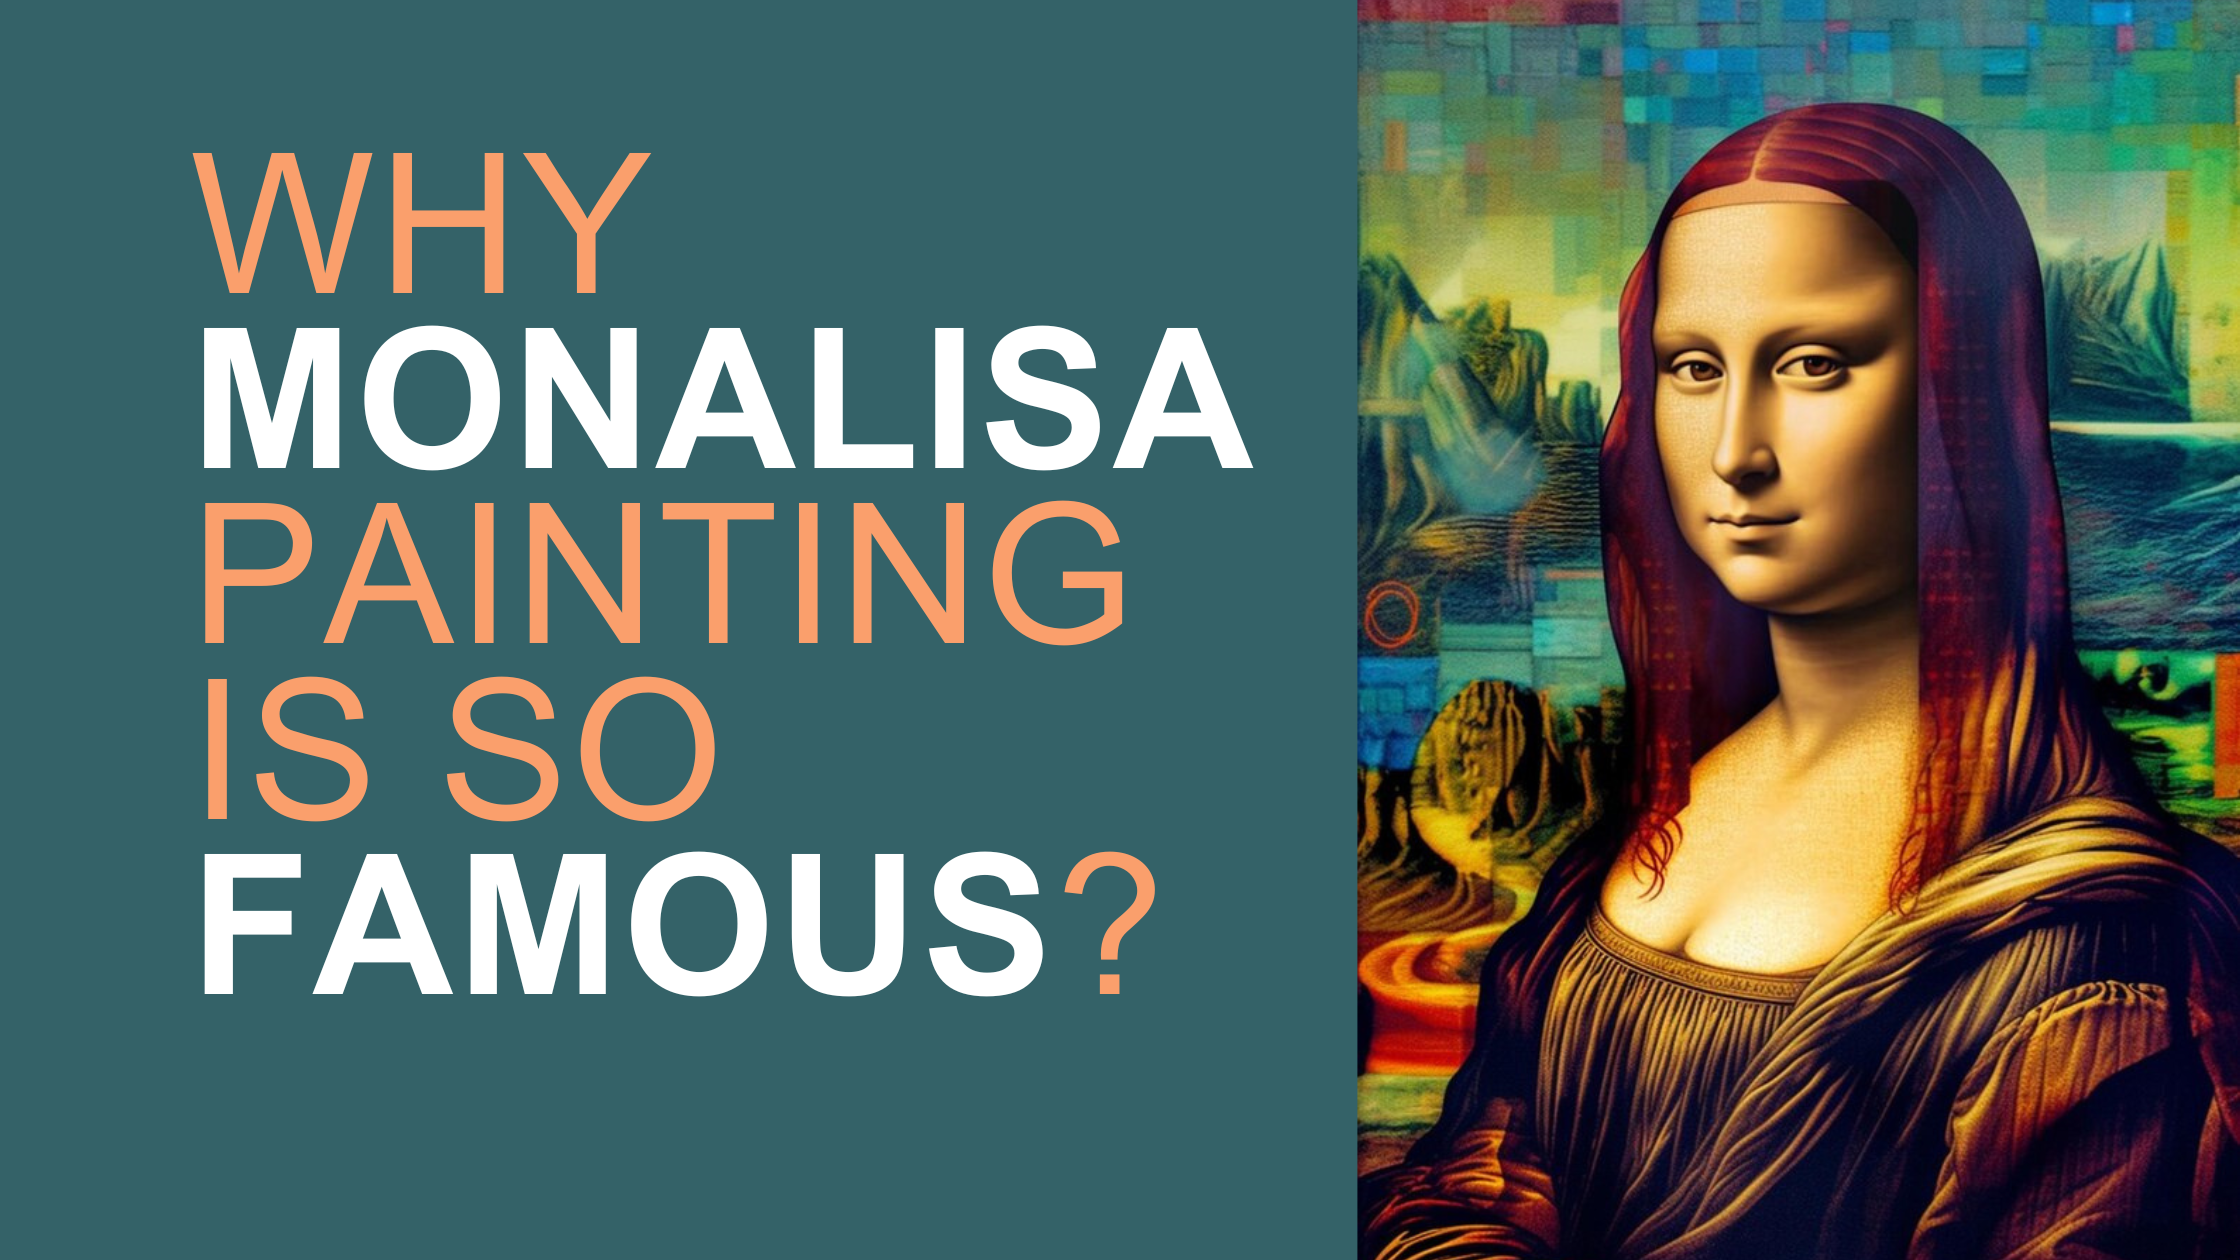 Why is the Monalisa so famous? Monalisa's portrait painting